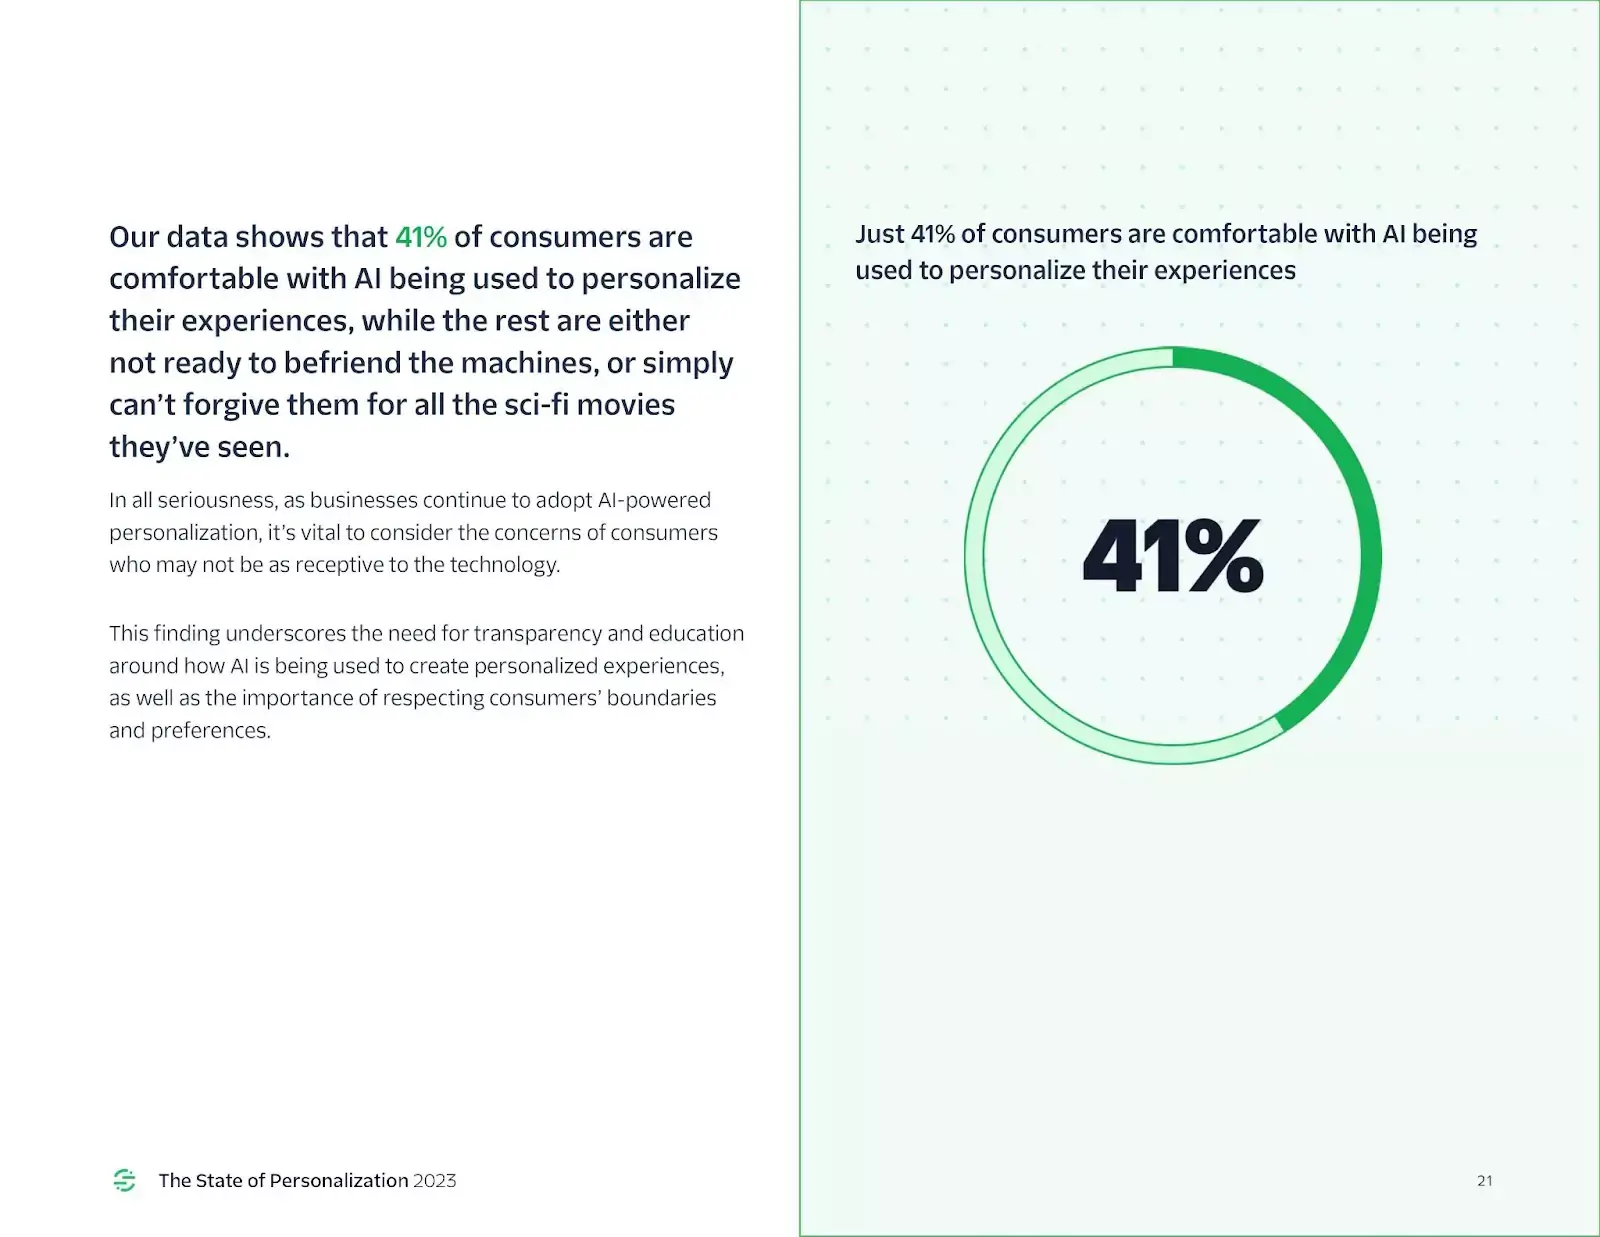 41% of customers are comfortable with AI being used to personalized their experiences